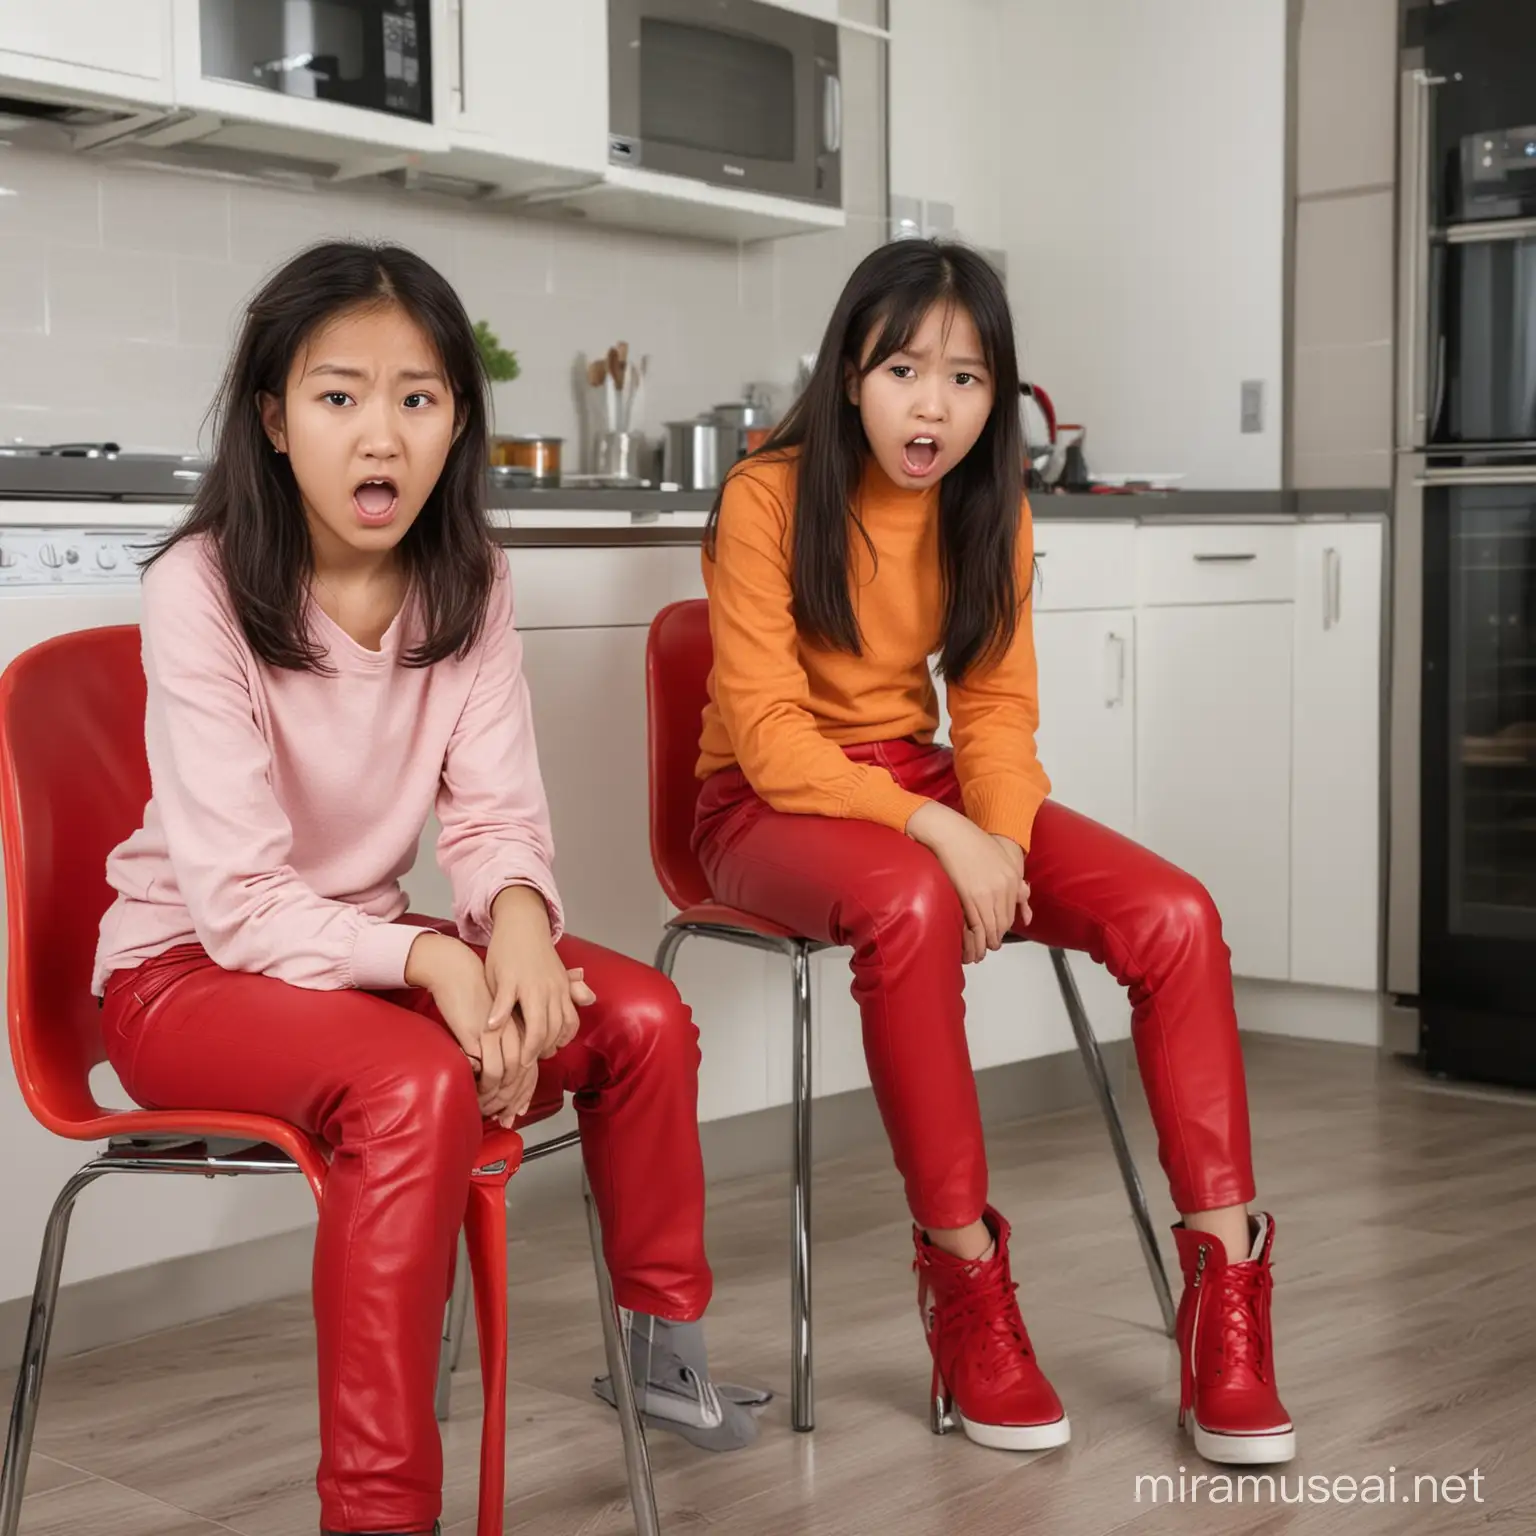 two asian girls,13 years,angry face,sitting on a chair,tight red leather pants,kitchen